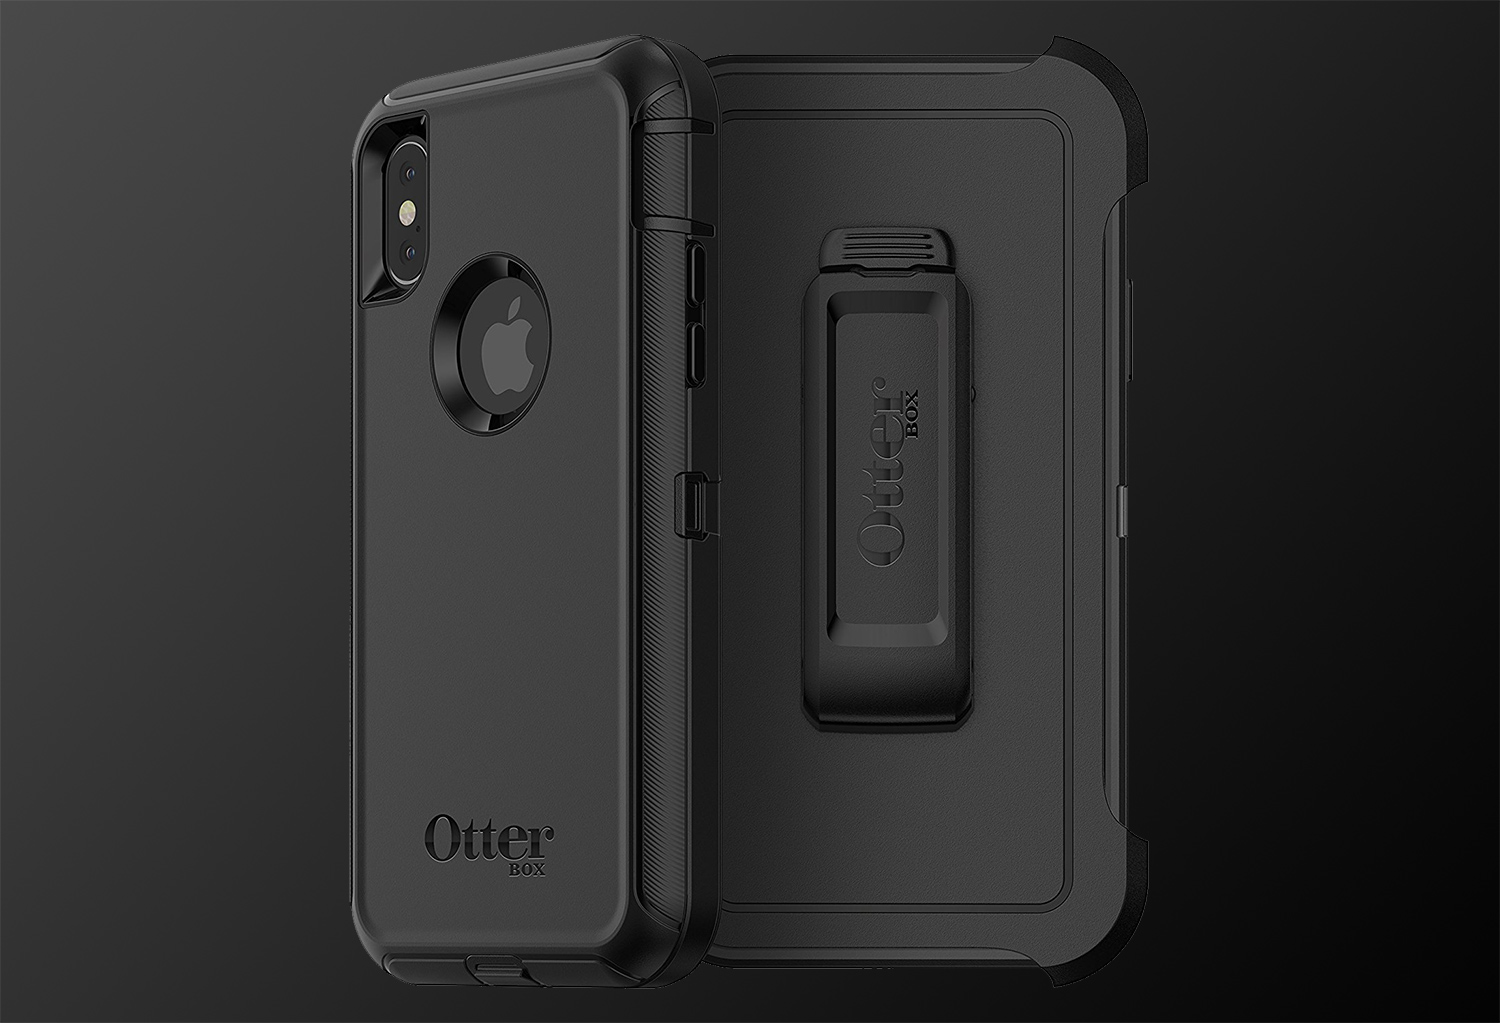 It’s iPhone day, and Amazon is blowing out OtterBox cases starting at